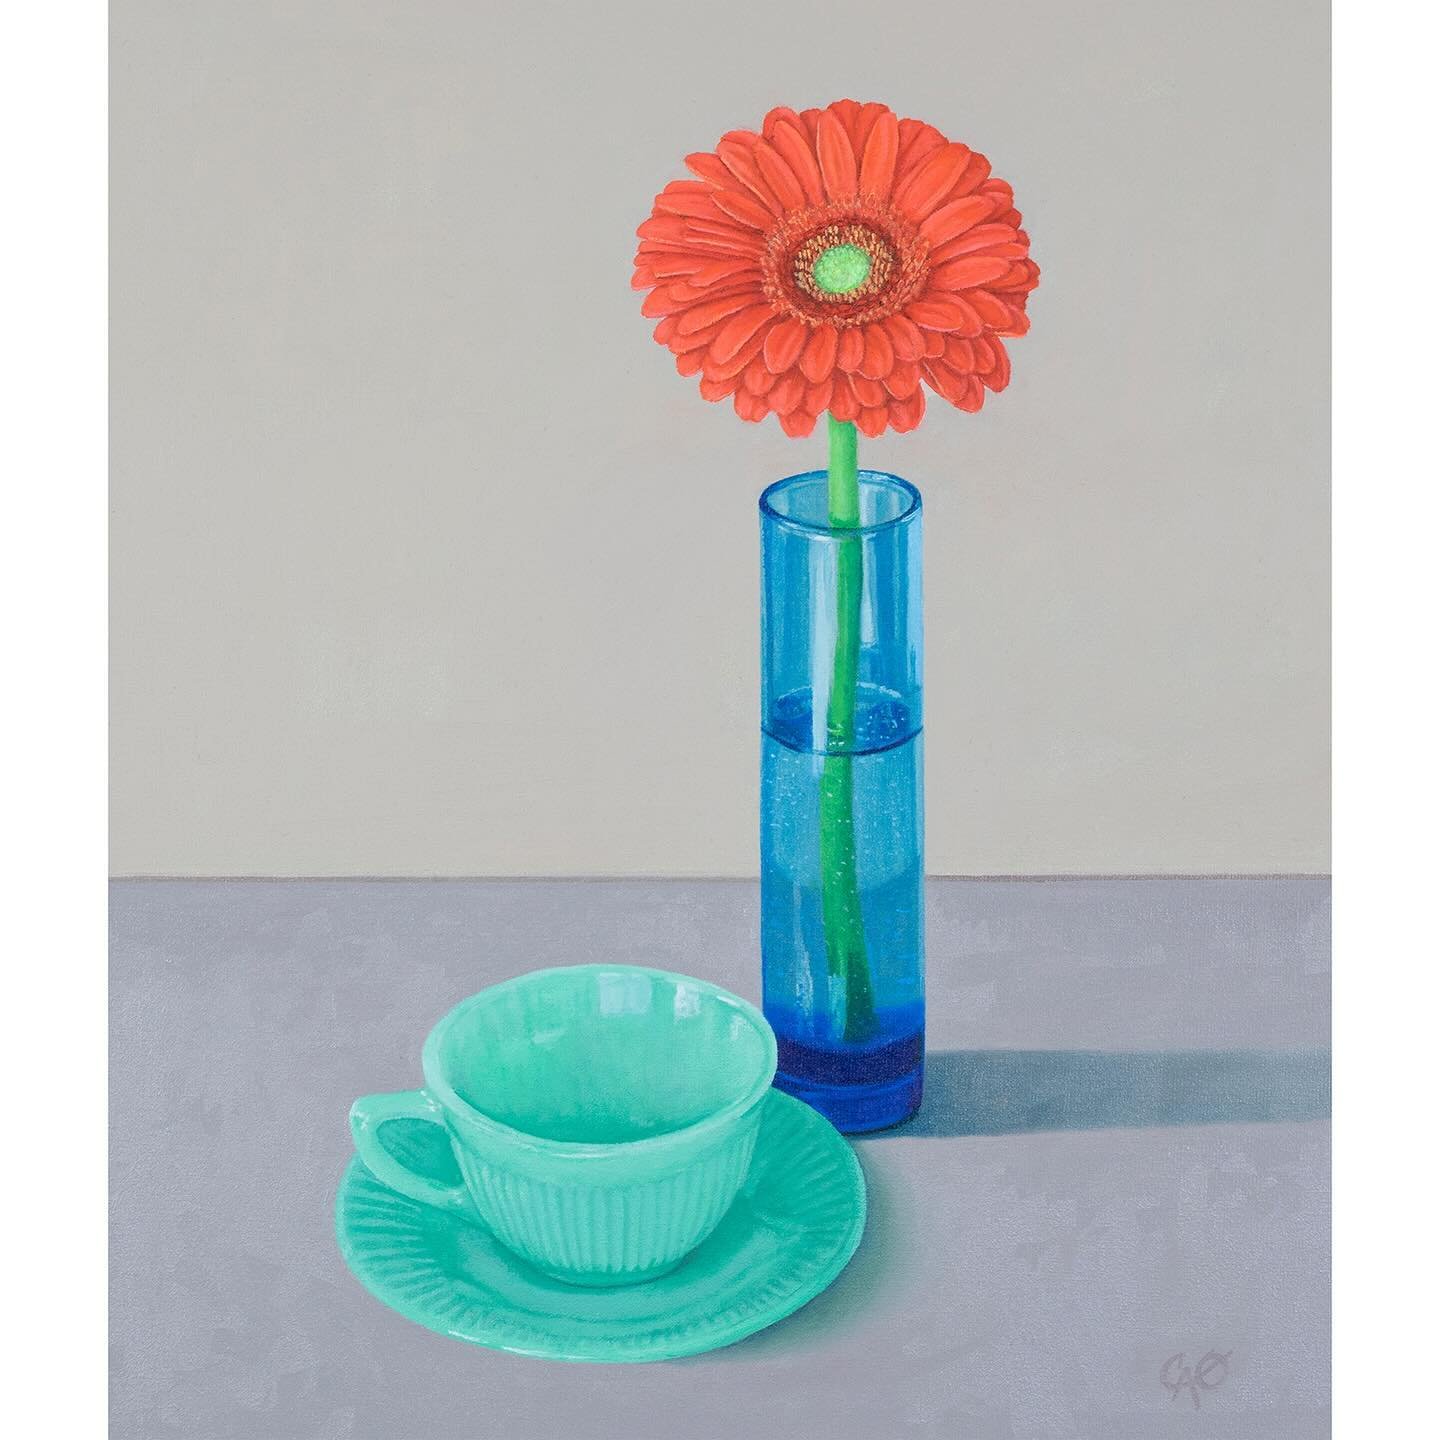 &ldquo;Daisy and Jadeite&rdquo;, oil on canvas, 14 x 12in. Gerbera Daisies are a testament to the joy and beauty that nature bestows upon us. Often associated with purity, innocence, and cheerfulness, they are believed to lessen everyday stresses. Wi